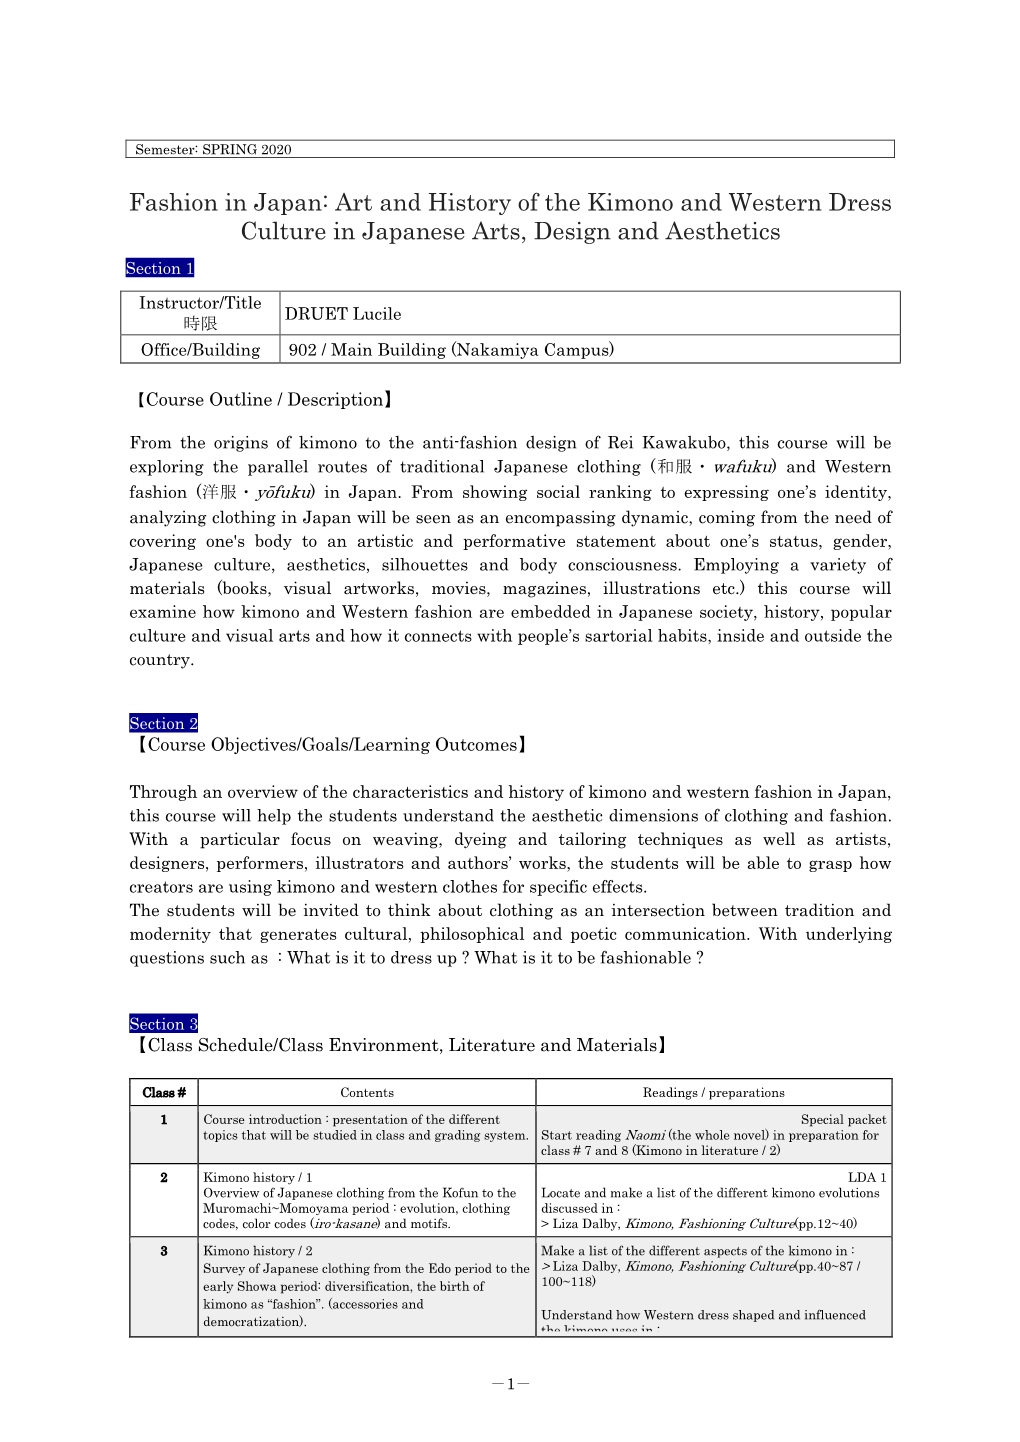 Fashion in Japan: Art and History of the Kimono and Western Dress Culture in Japanese Arts, Design and Aesthetics Section 1